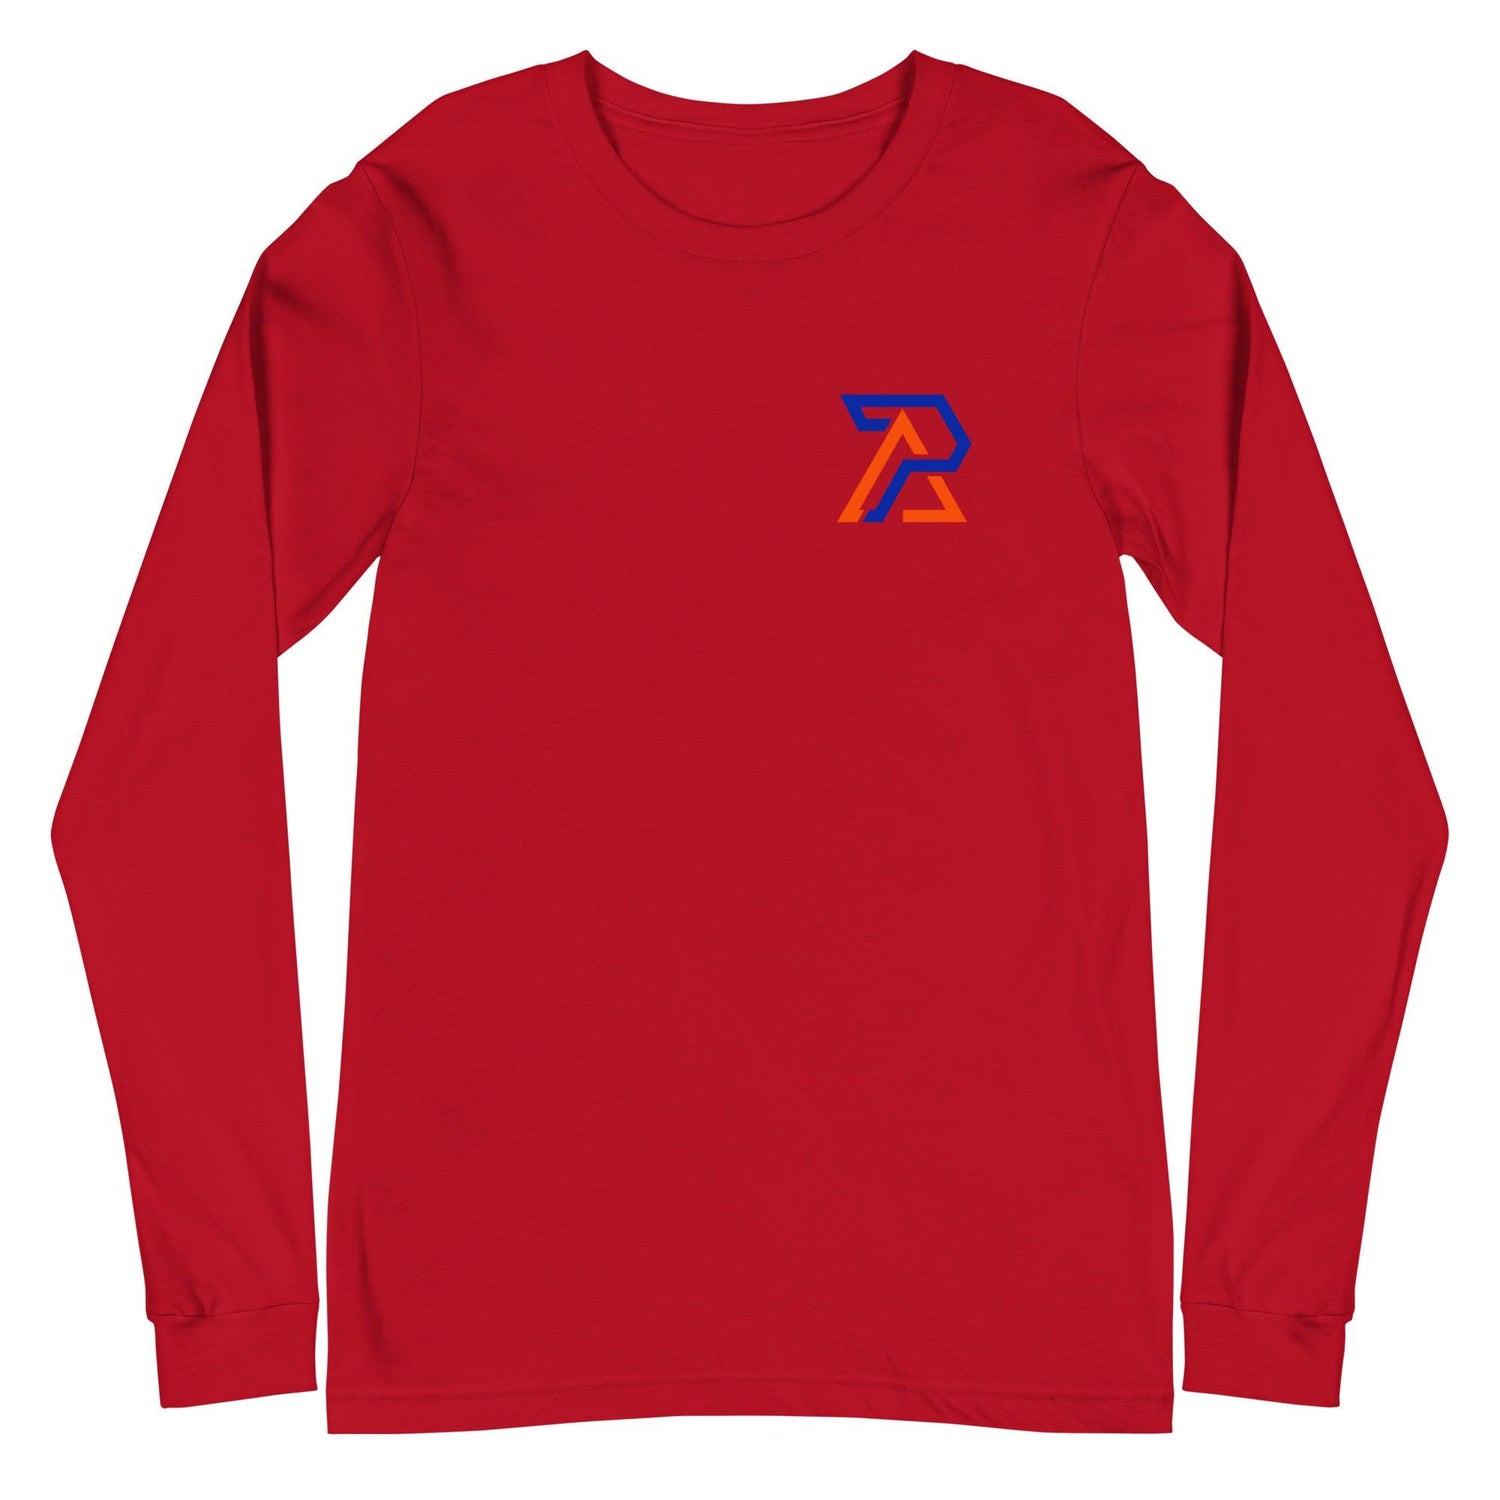 Philip Abner “Signature” Long Sleeve Tee - Fan Arch